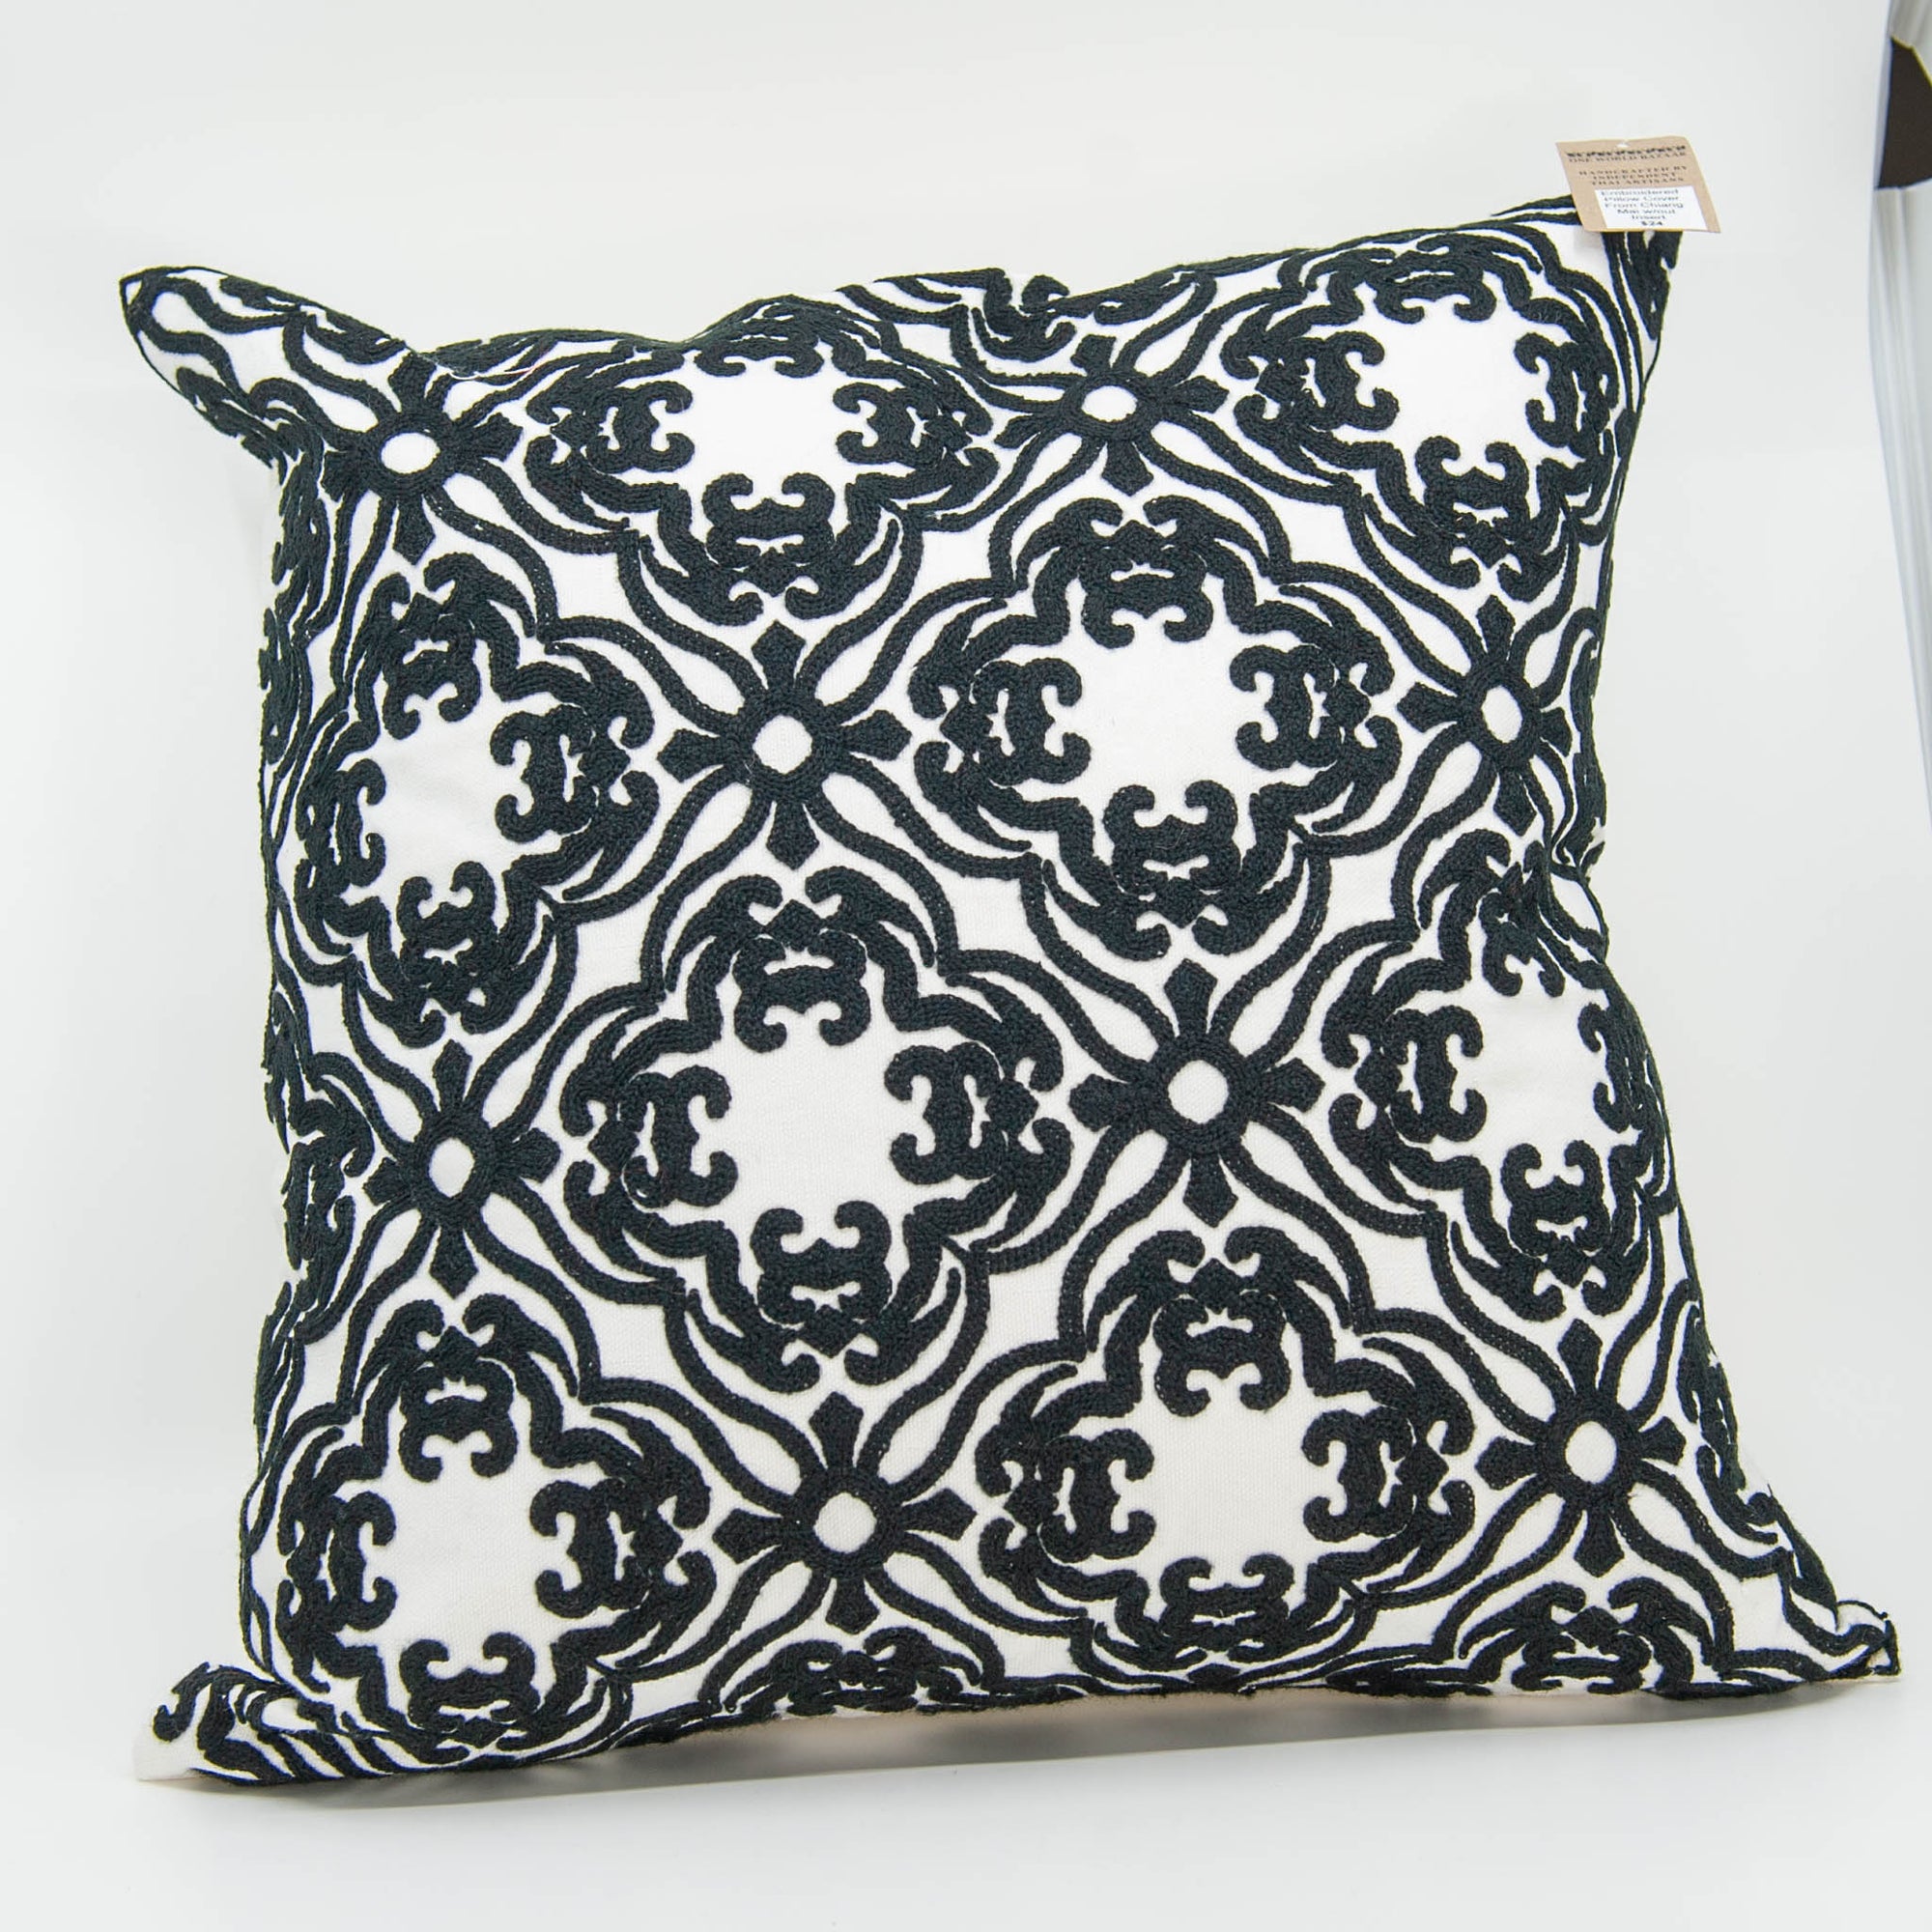 Embroidered Pillow Cover - Black Flower